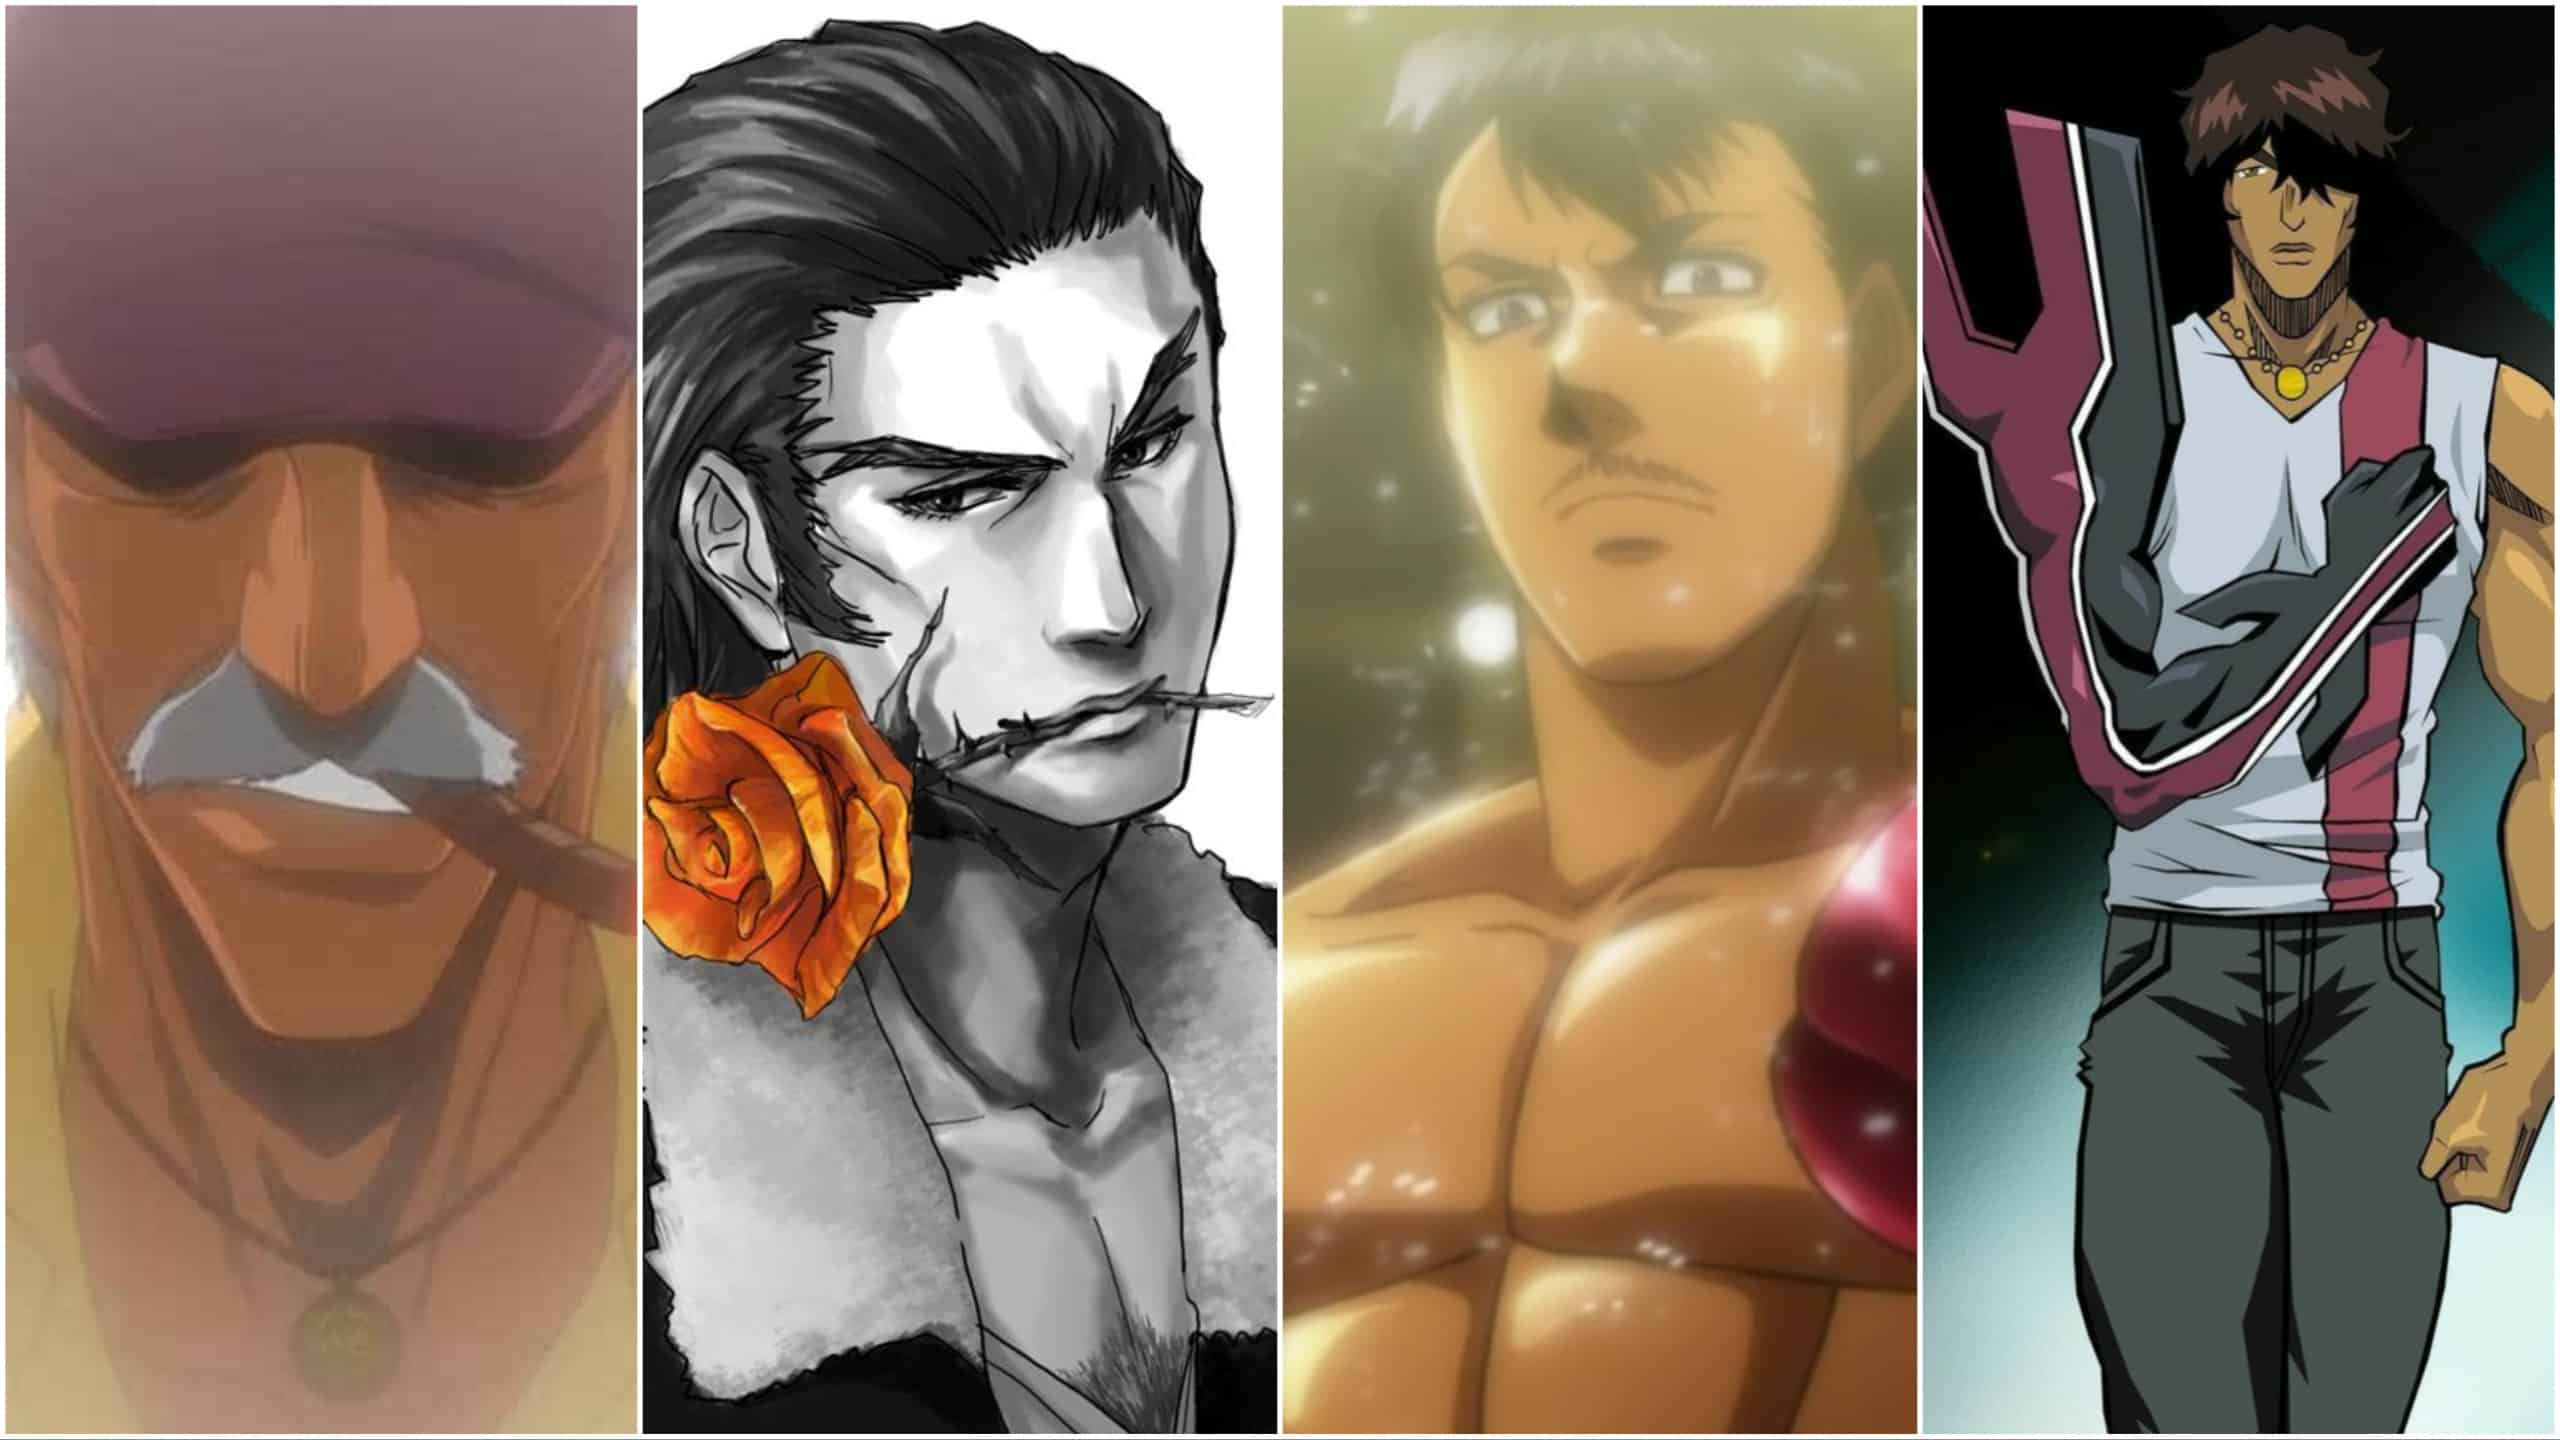 10 popular Mexican anime characters of all time, ranked - Tuko.co.ke